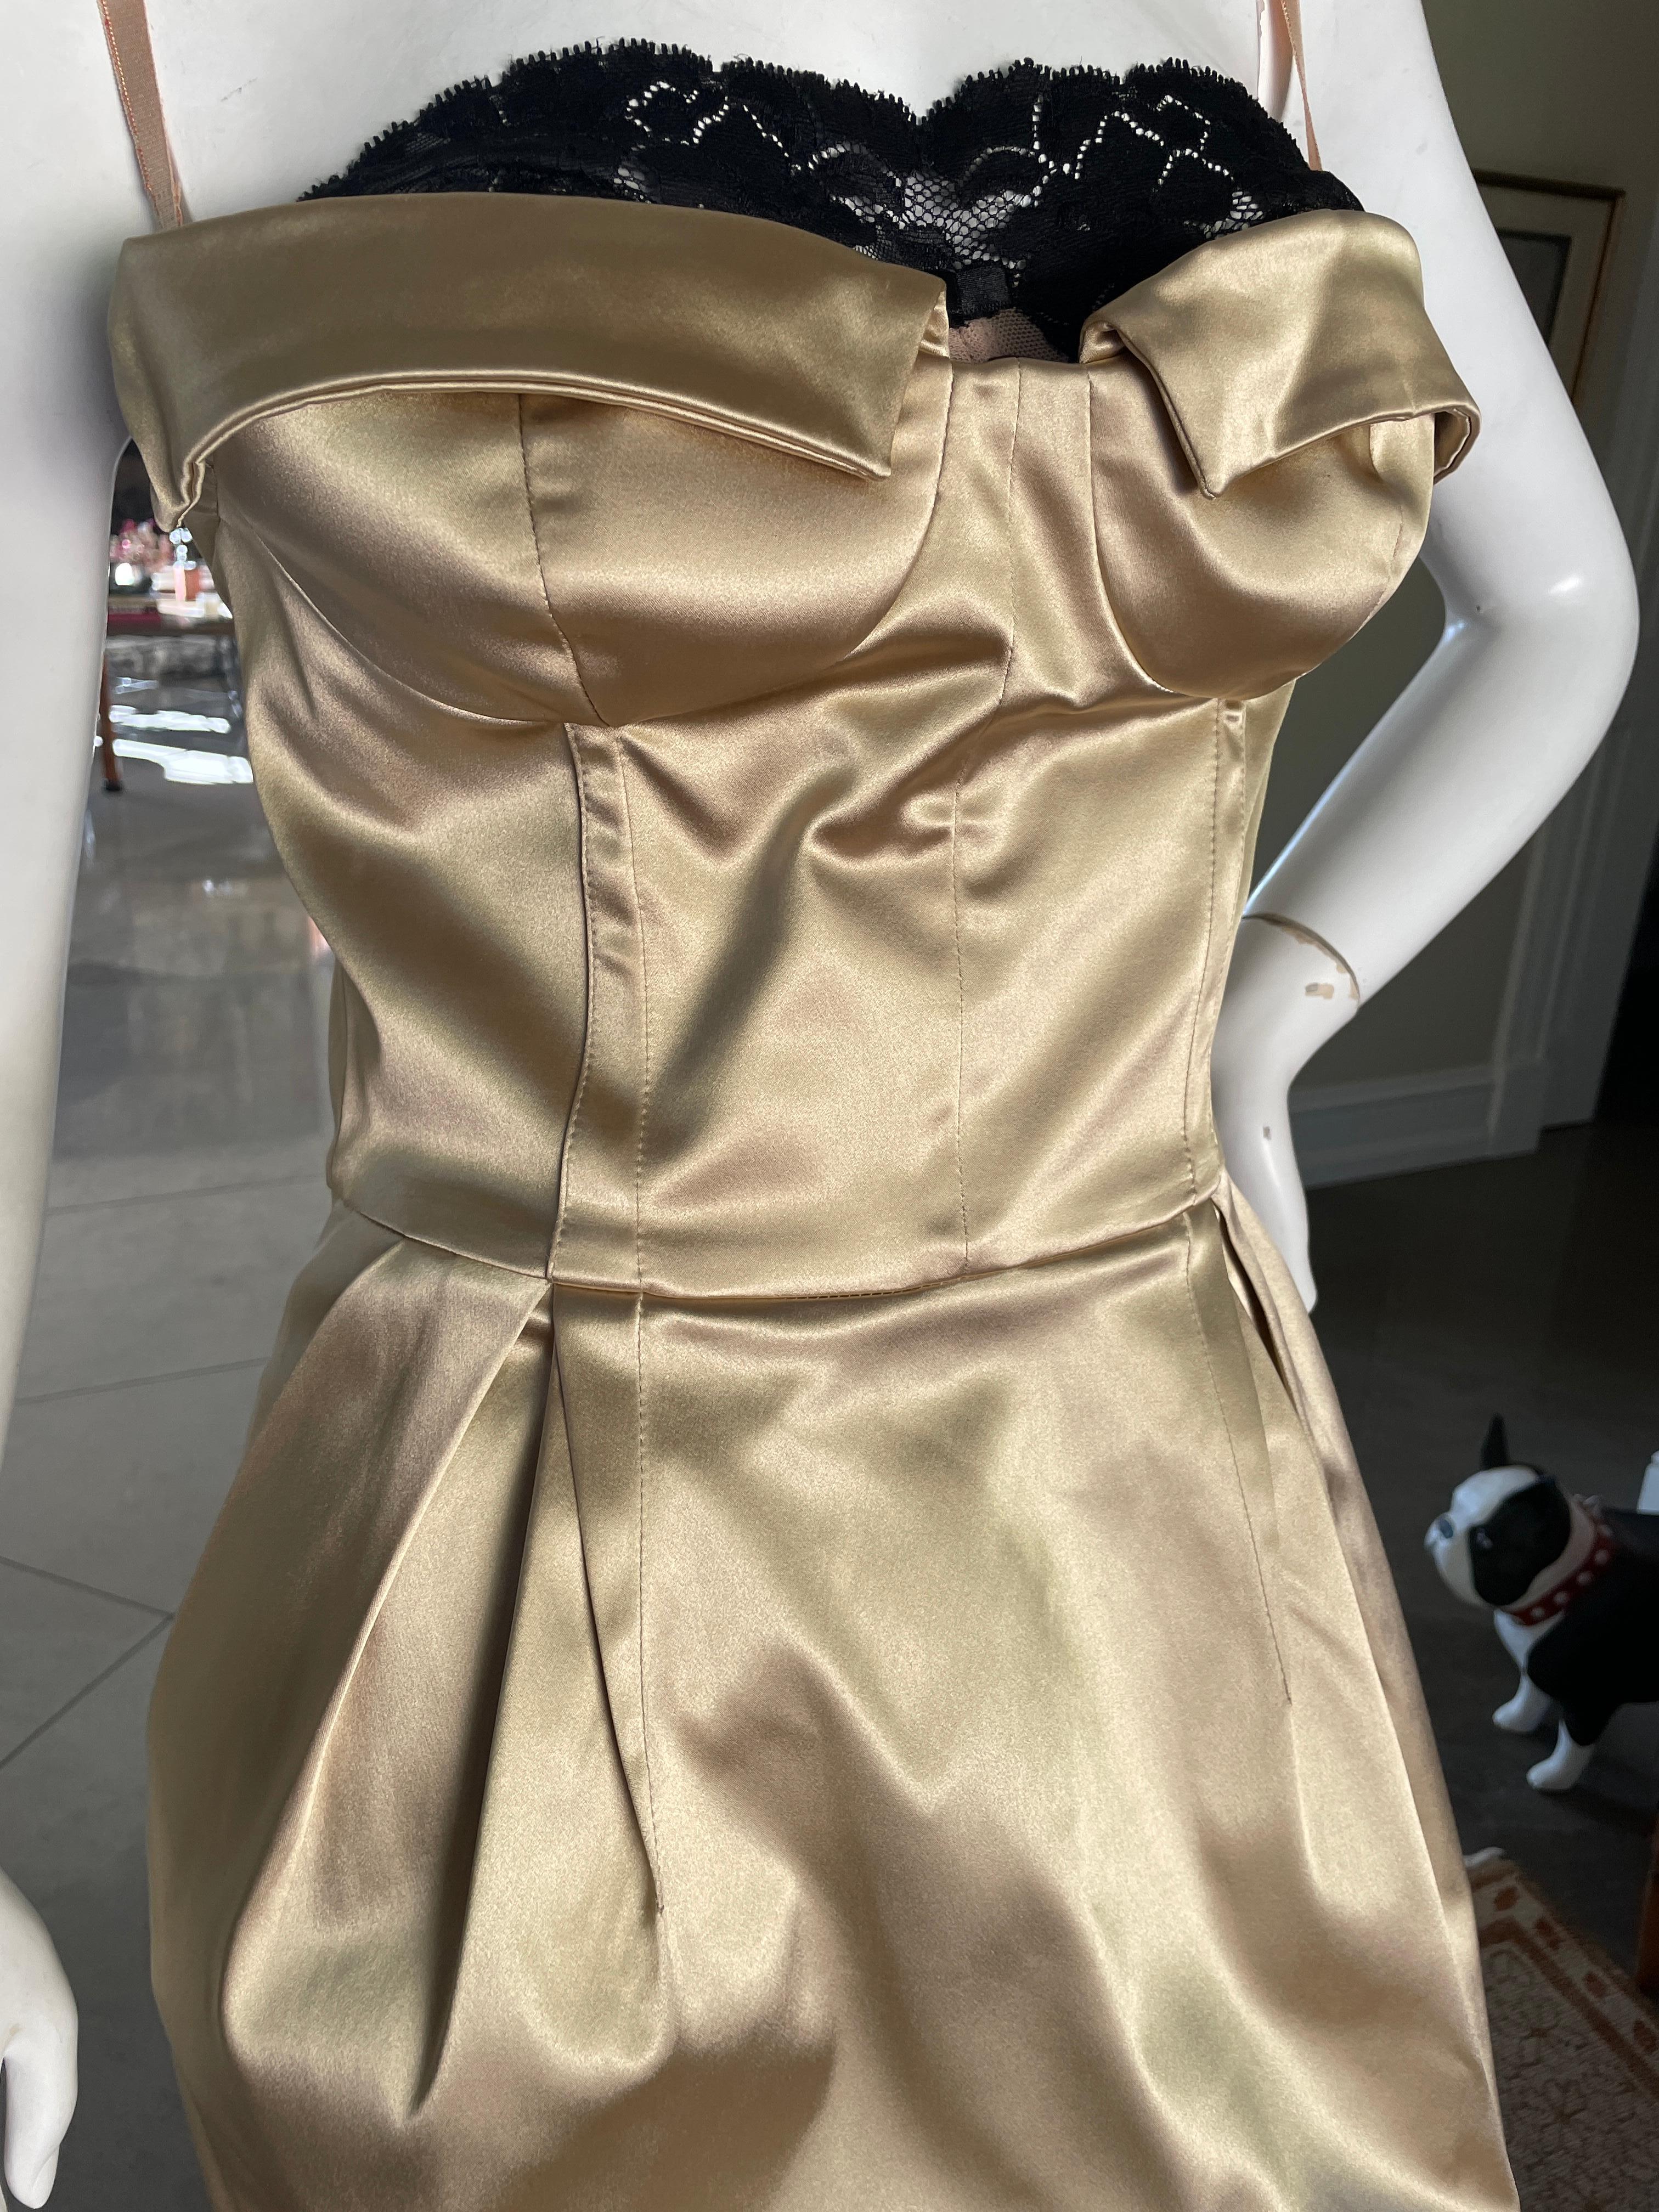 Dolce & Gabbana Vintage Strapless Gold Lace Trim Cocktail Dress w Leopard Lining In Excellent Condition For Sale In Cloverdale, CA